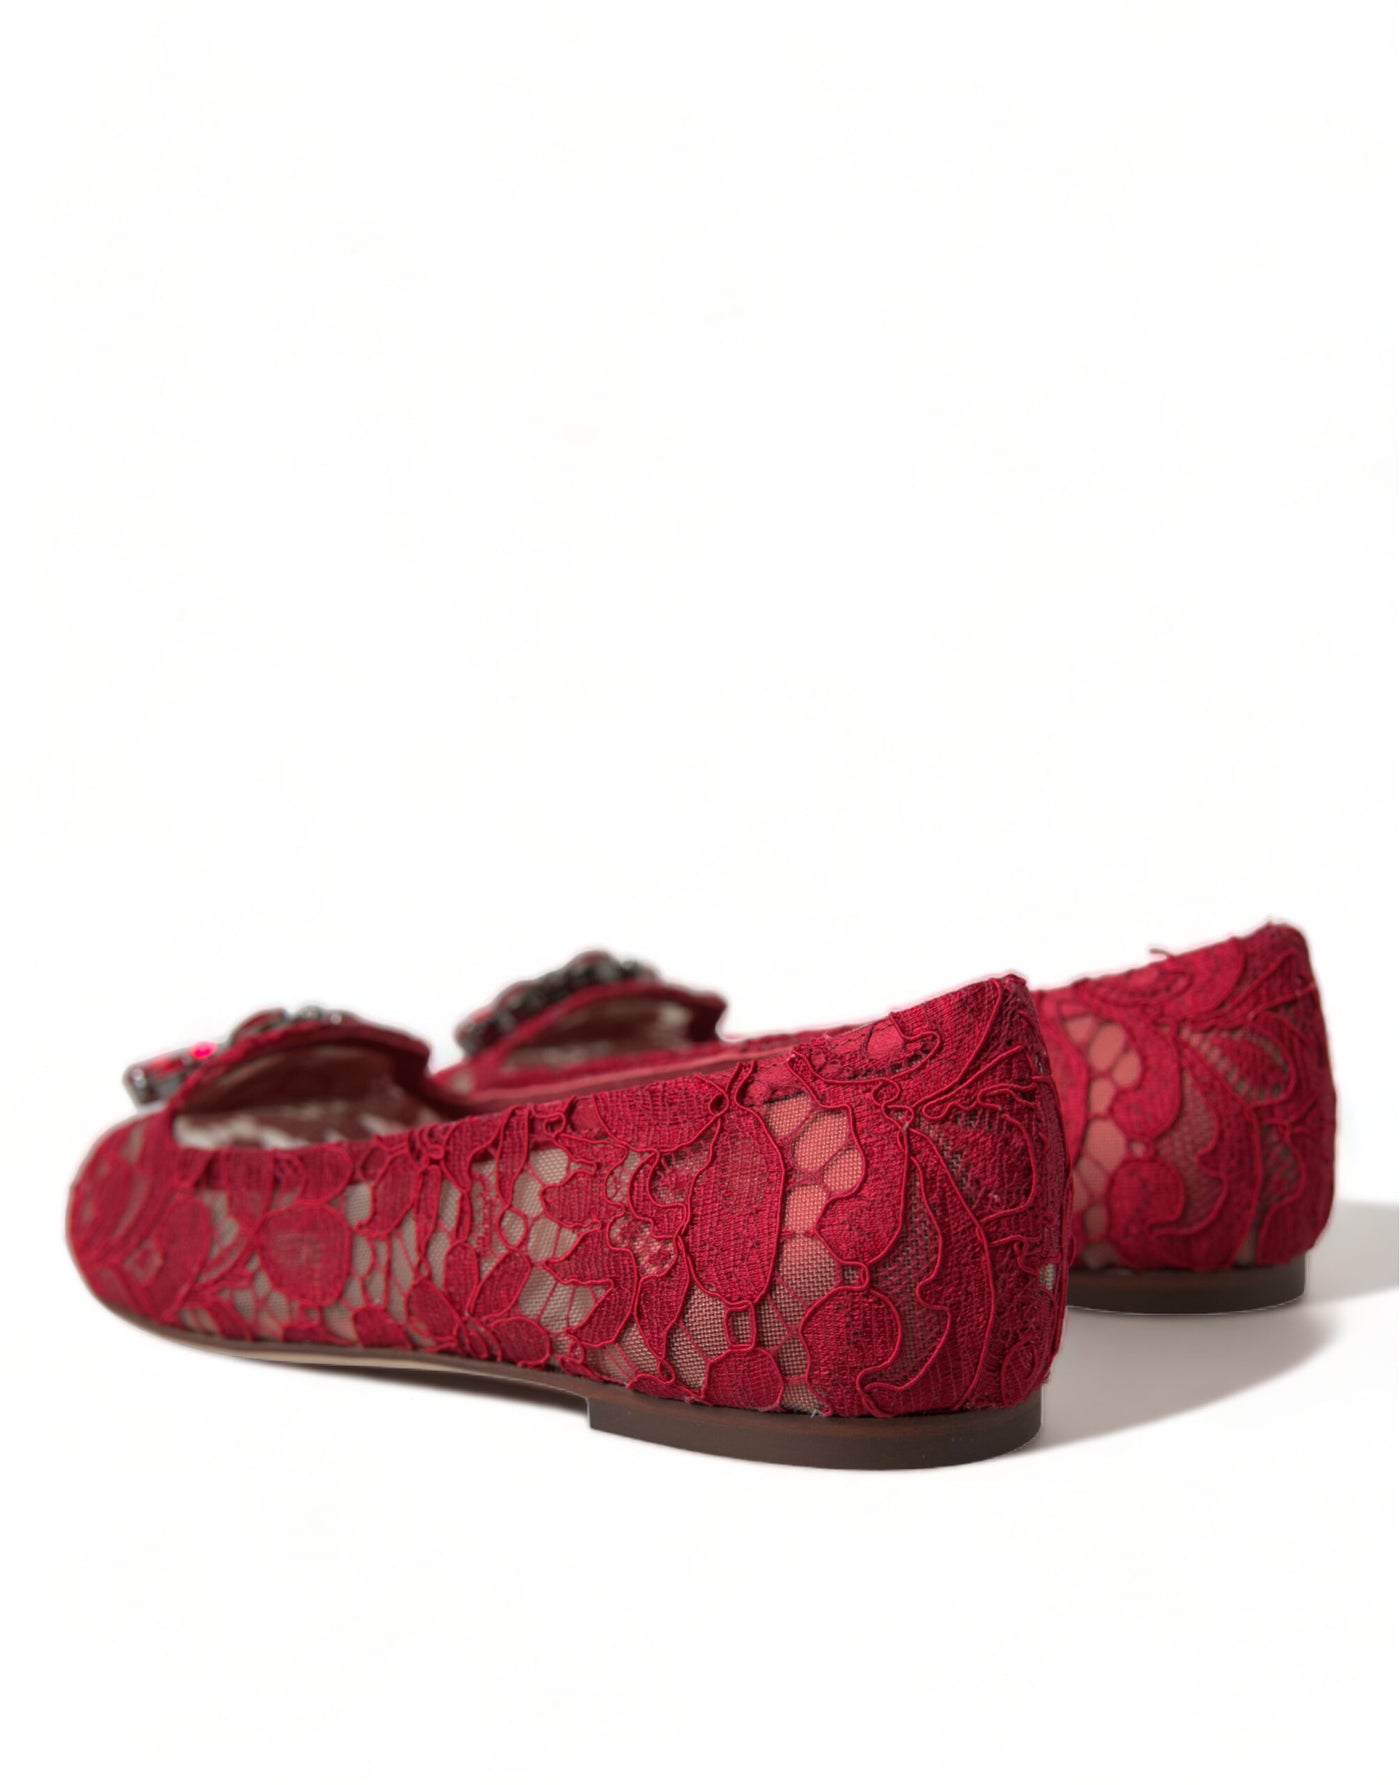 Red Vally Taormina Lace Crystals Flats Shoes